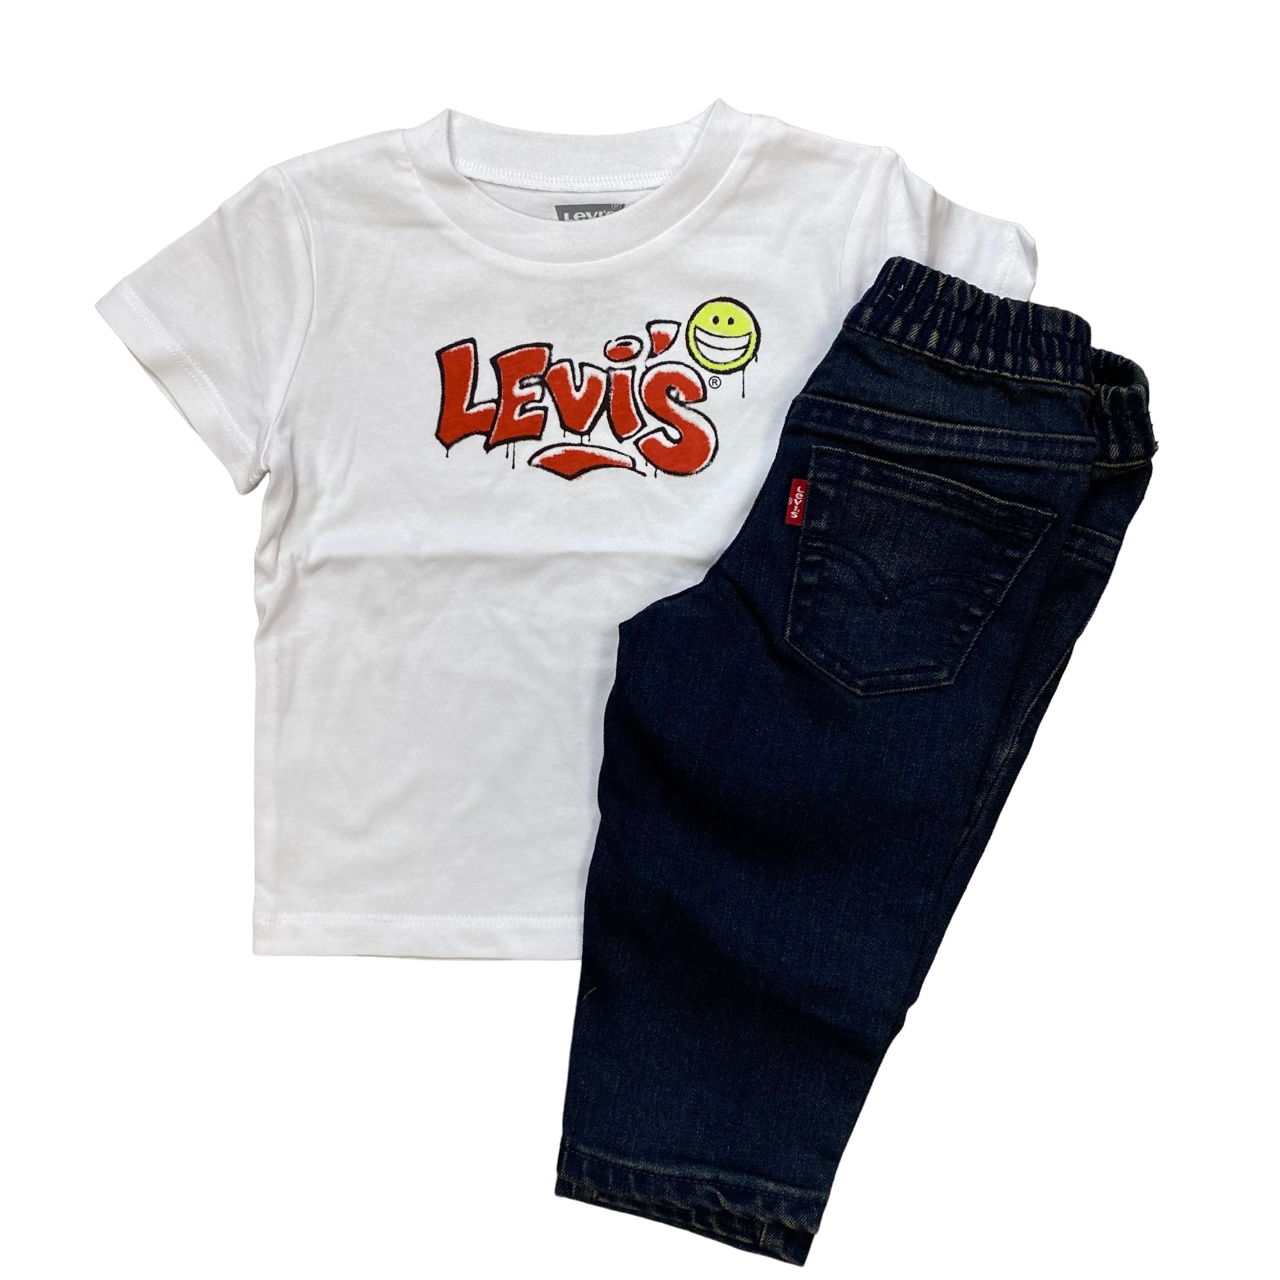 Levi&#39;s infant suit with hooded sweatshirt, t-shirt and jeans trousers 6EJ101-G2H gray black